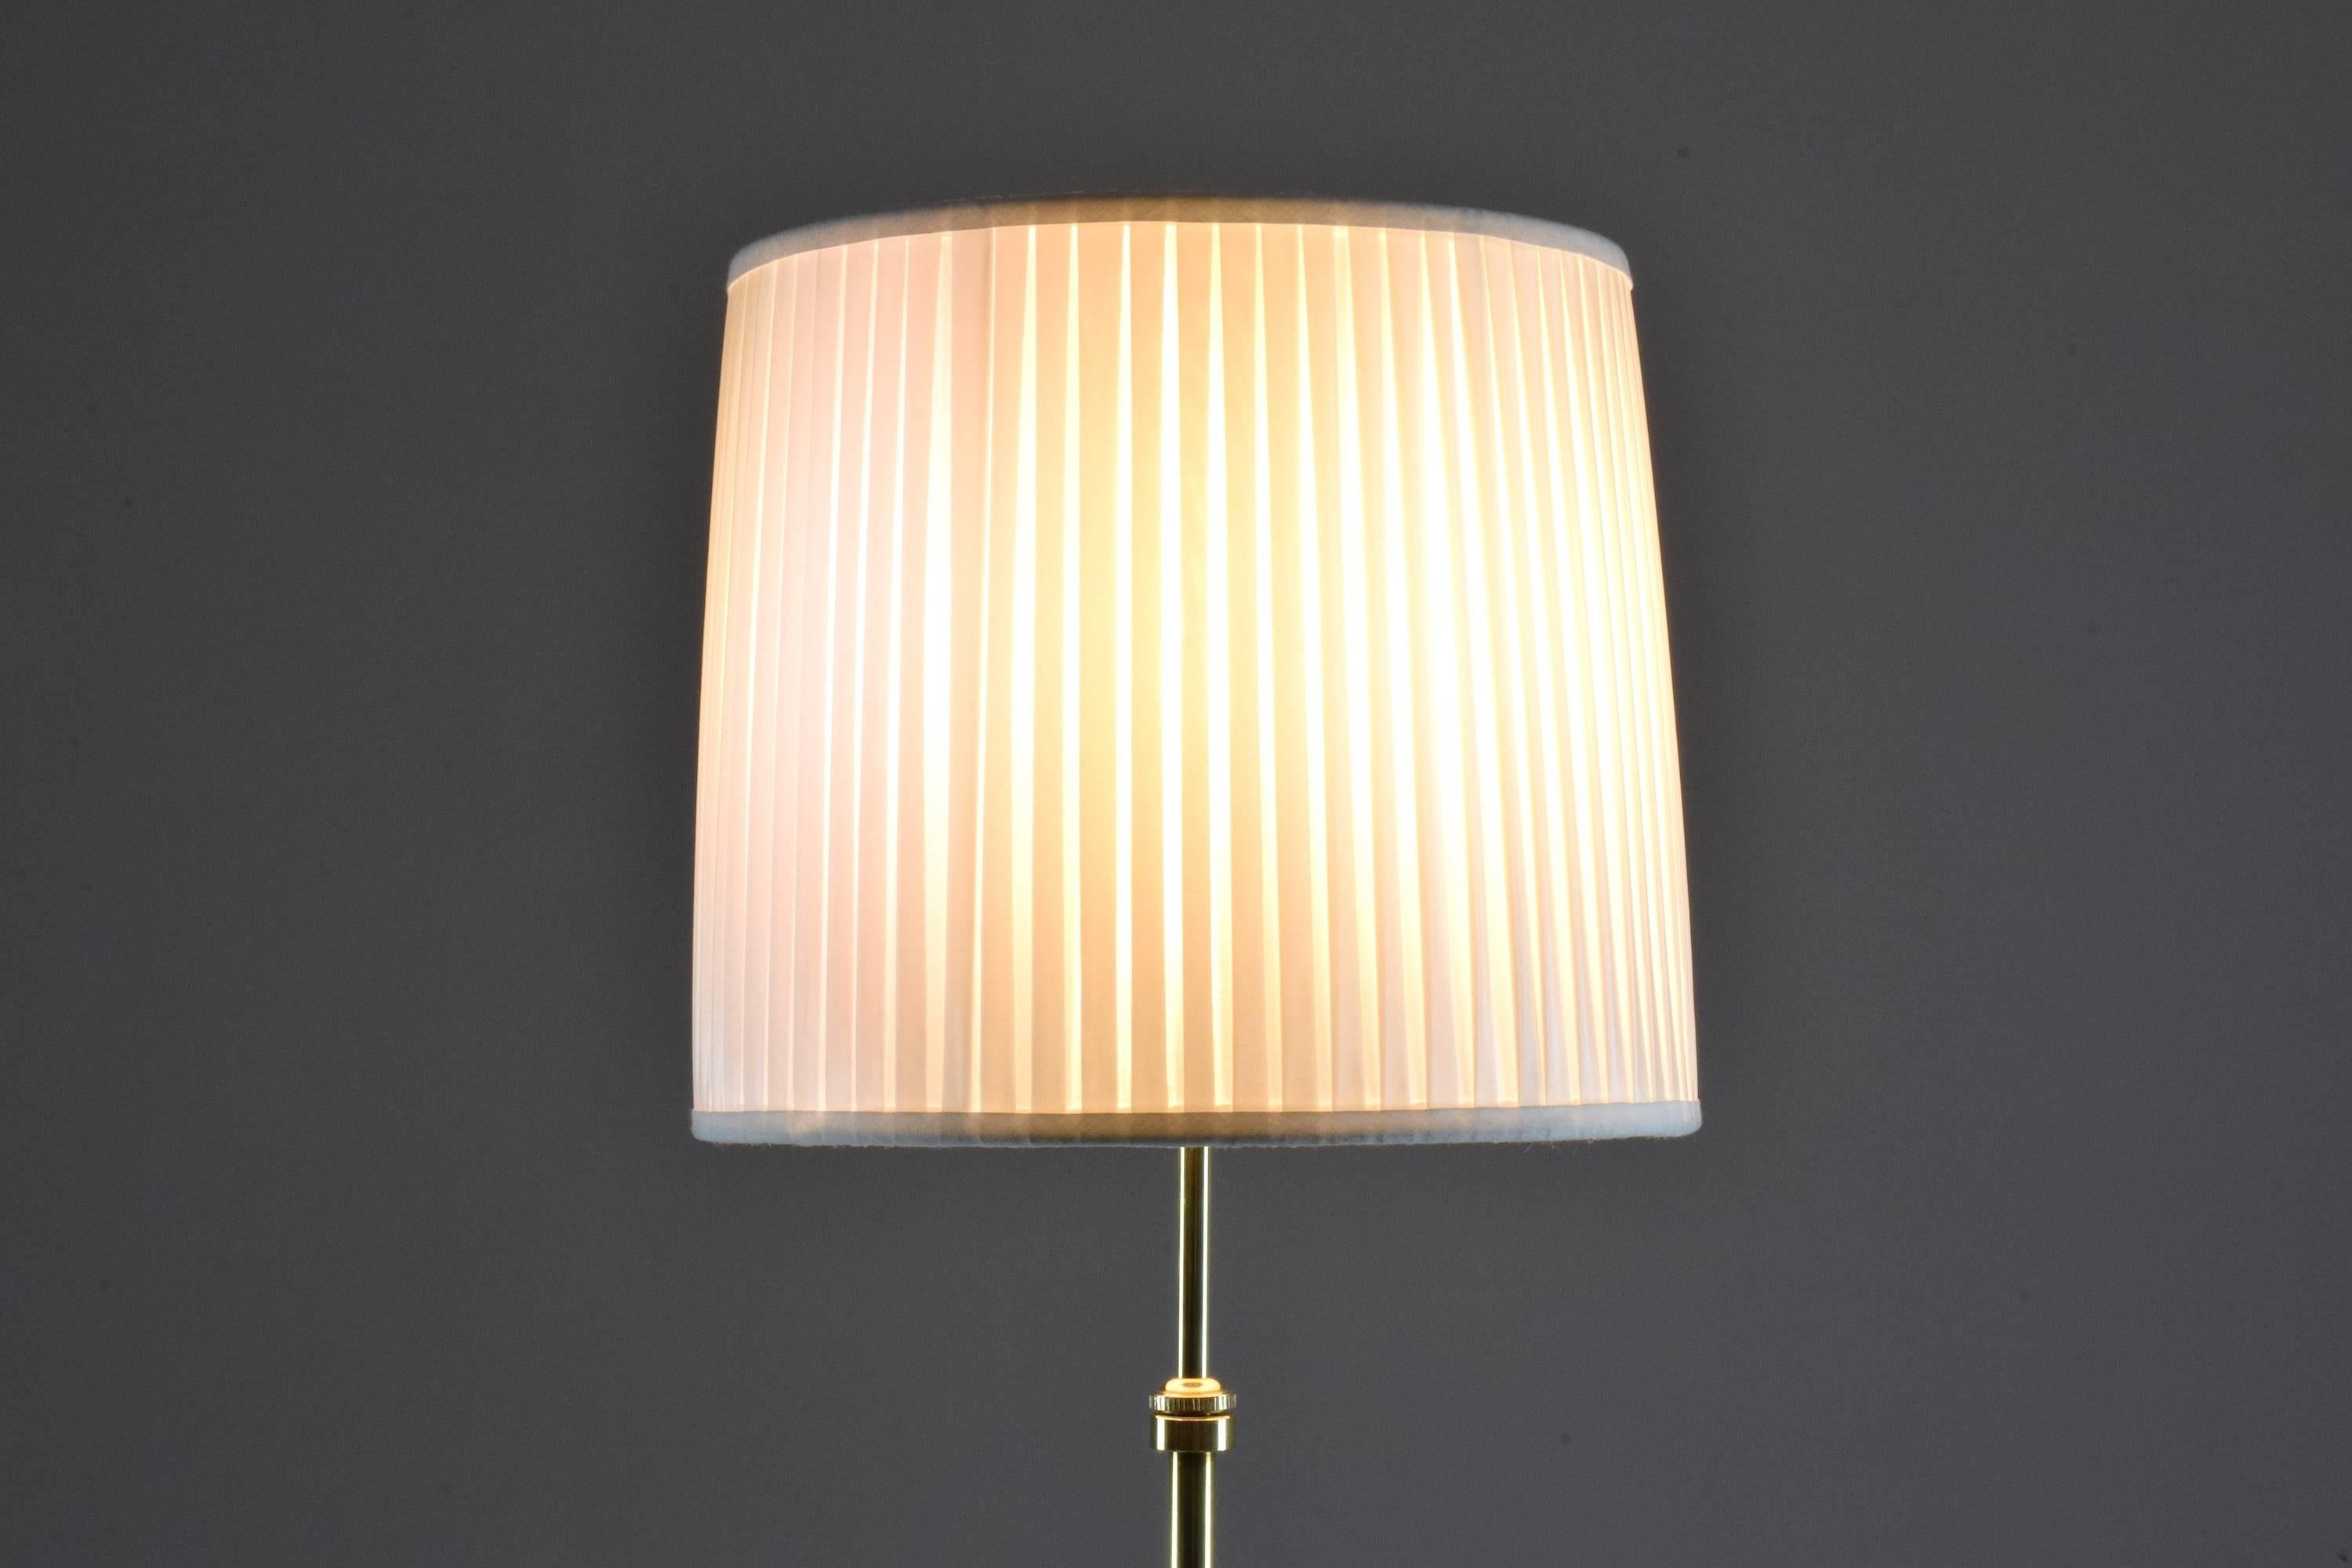 Contemporary handcrafted floor lamp composed of a solid brass structure -pictured here in a polished finish - which adjusts in height and is designed with a pleated white fabric lampshade. 

Flow collection, Equilibrium-I model II
21st century